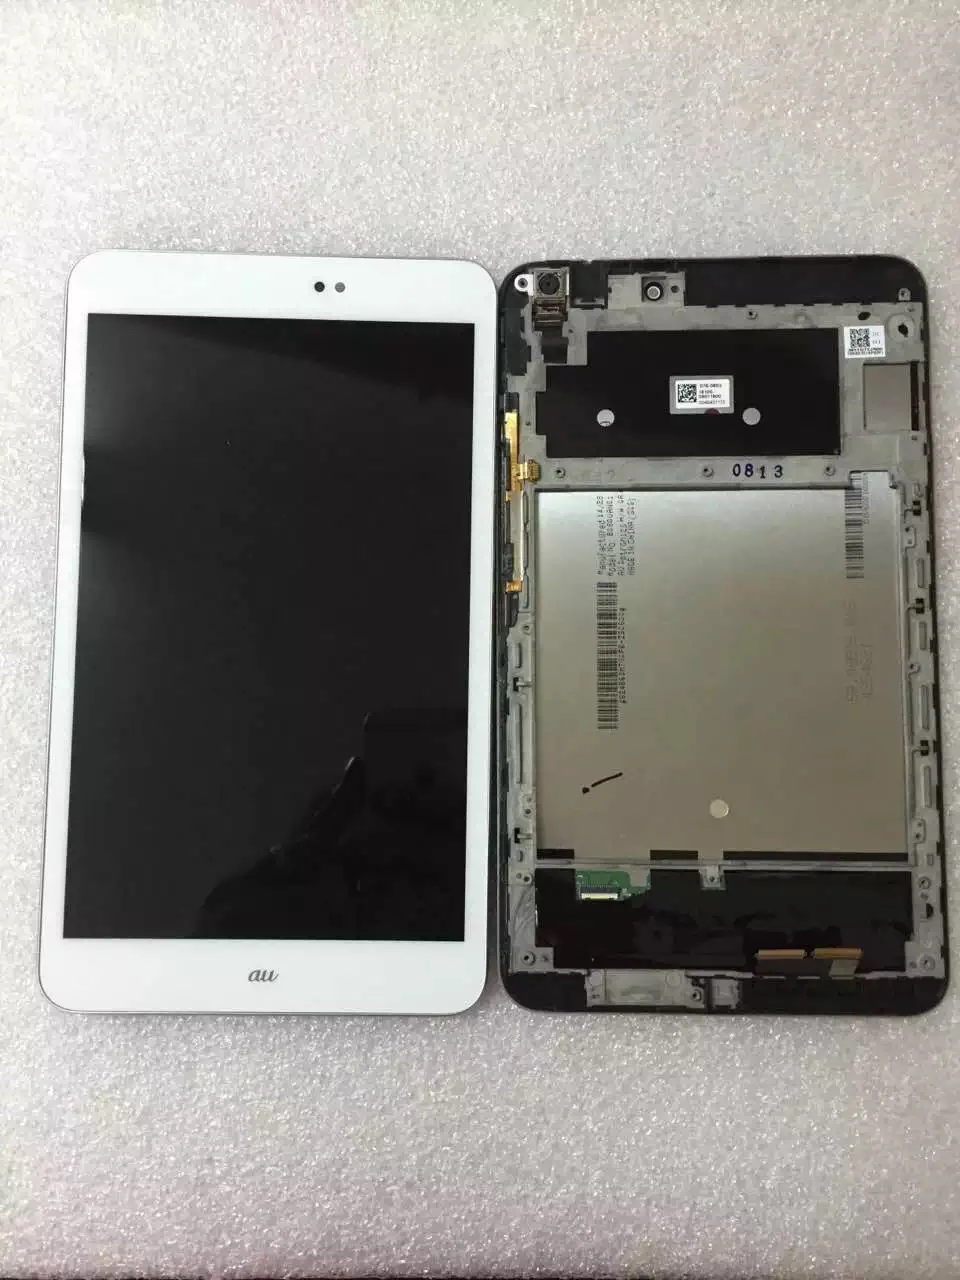 For Asus Memo Pad 8 ME581 ME581C ME 581 K015 Touch Screen Digitizer Glass + LCD Display with frame au logo